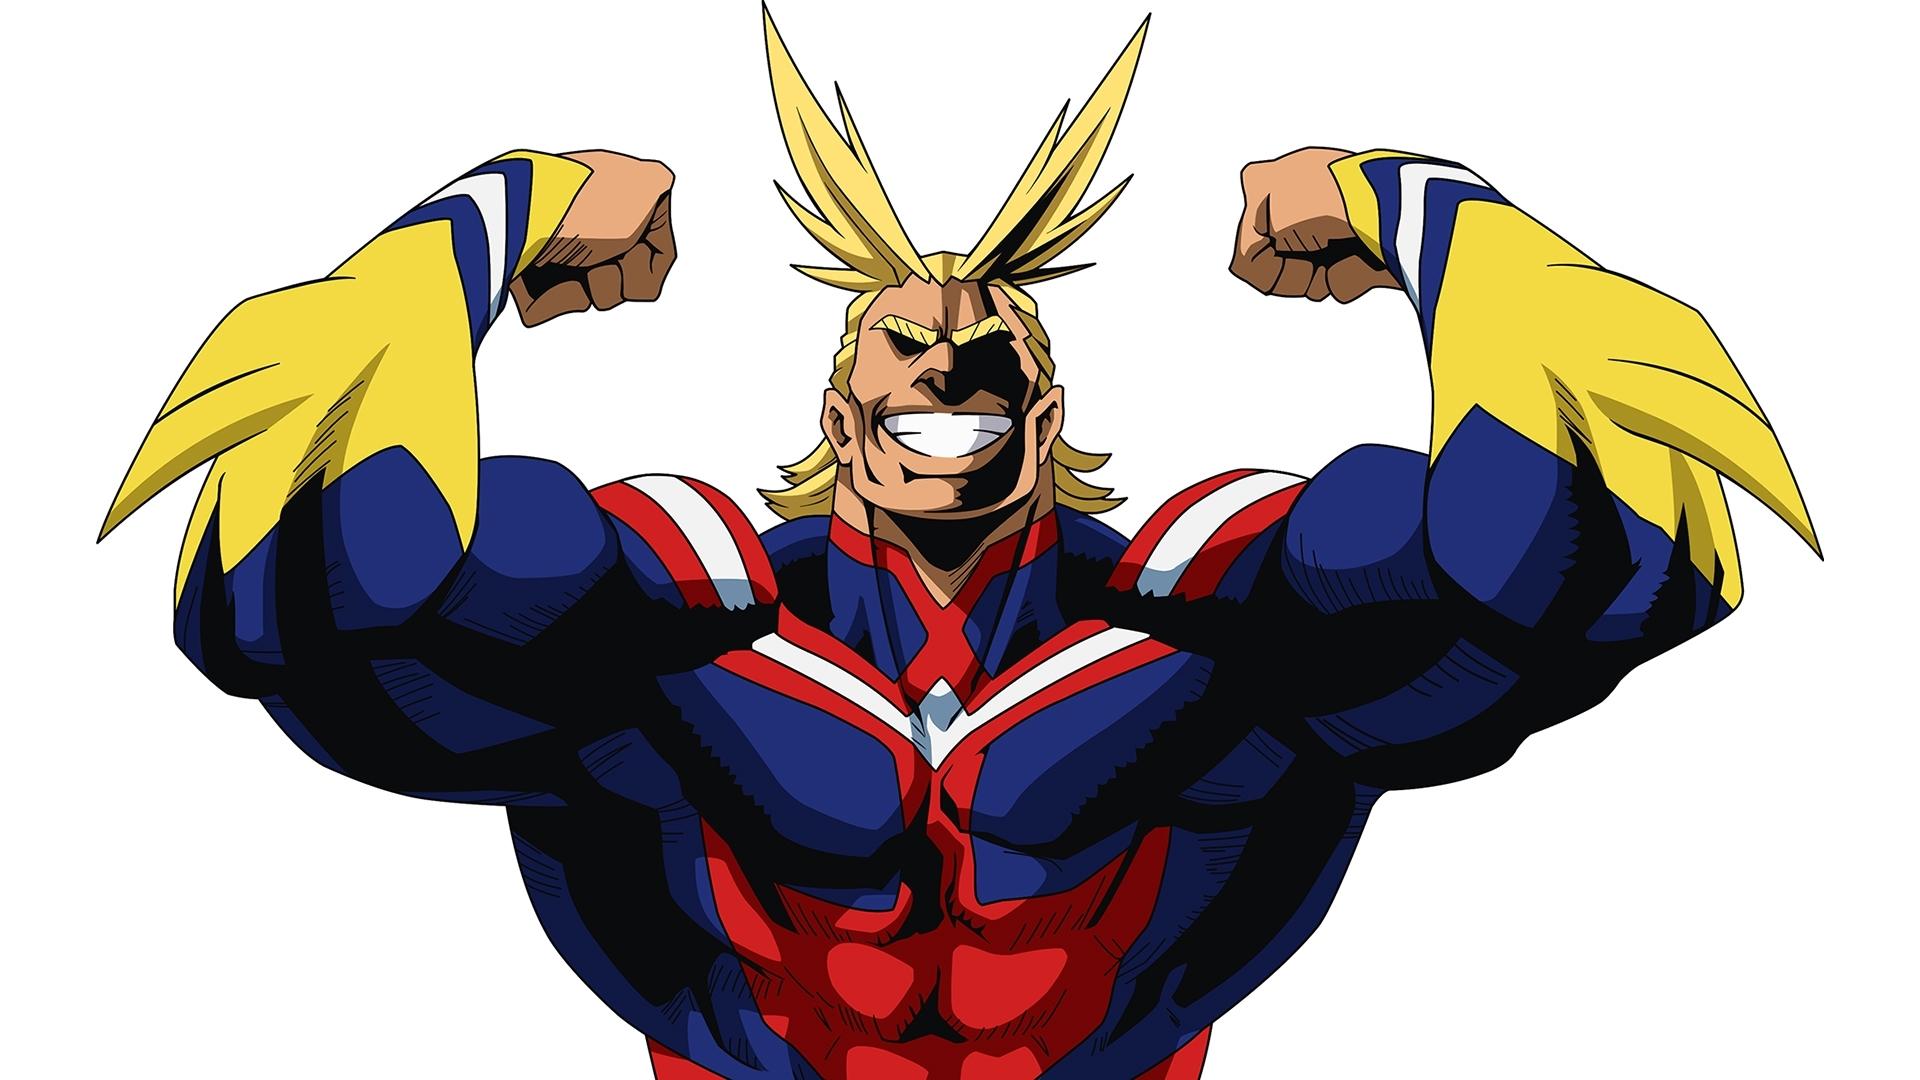 1920 x 1080 · jpeg - 10 New All Might My Hero Academia Wallpaper FULL HD 19201080 For PC ...